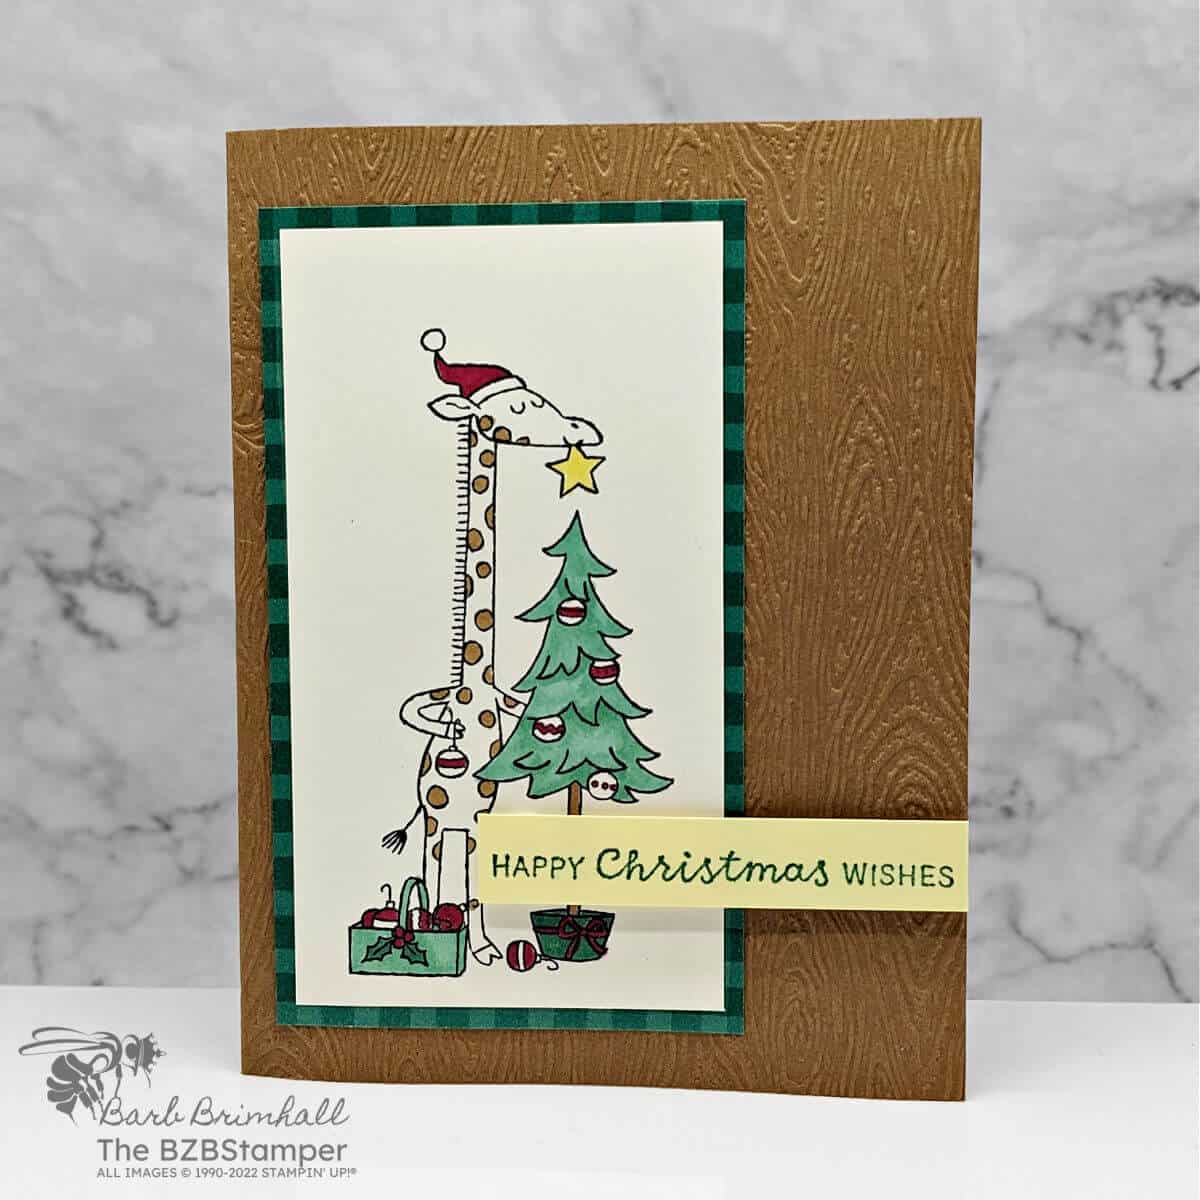 The Festive and Fun Stamp Set by Stampin’ Up!